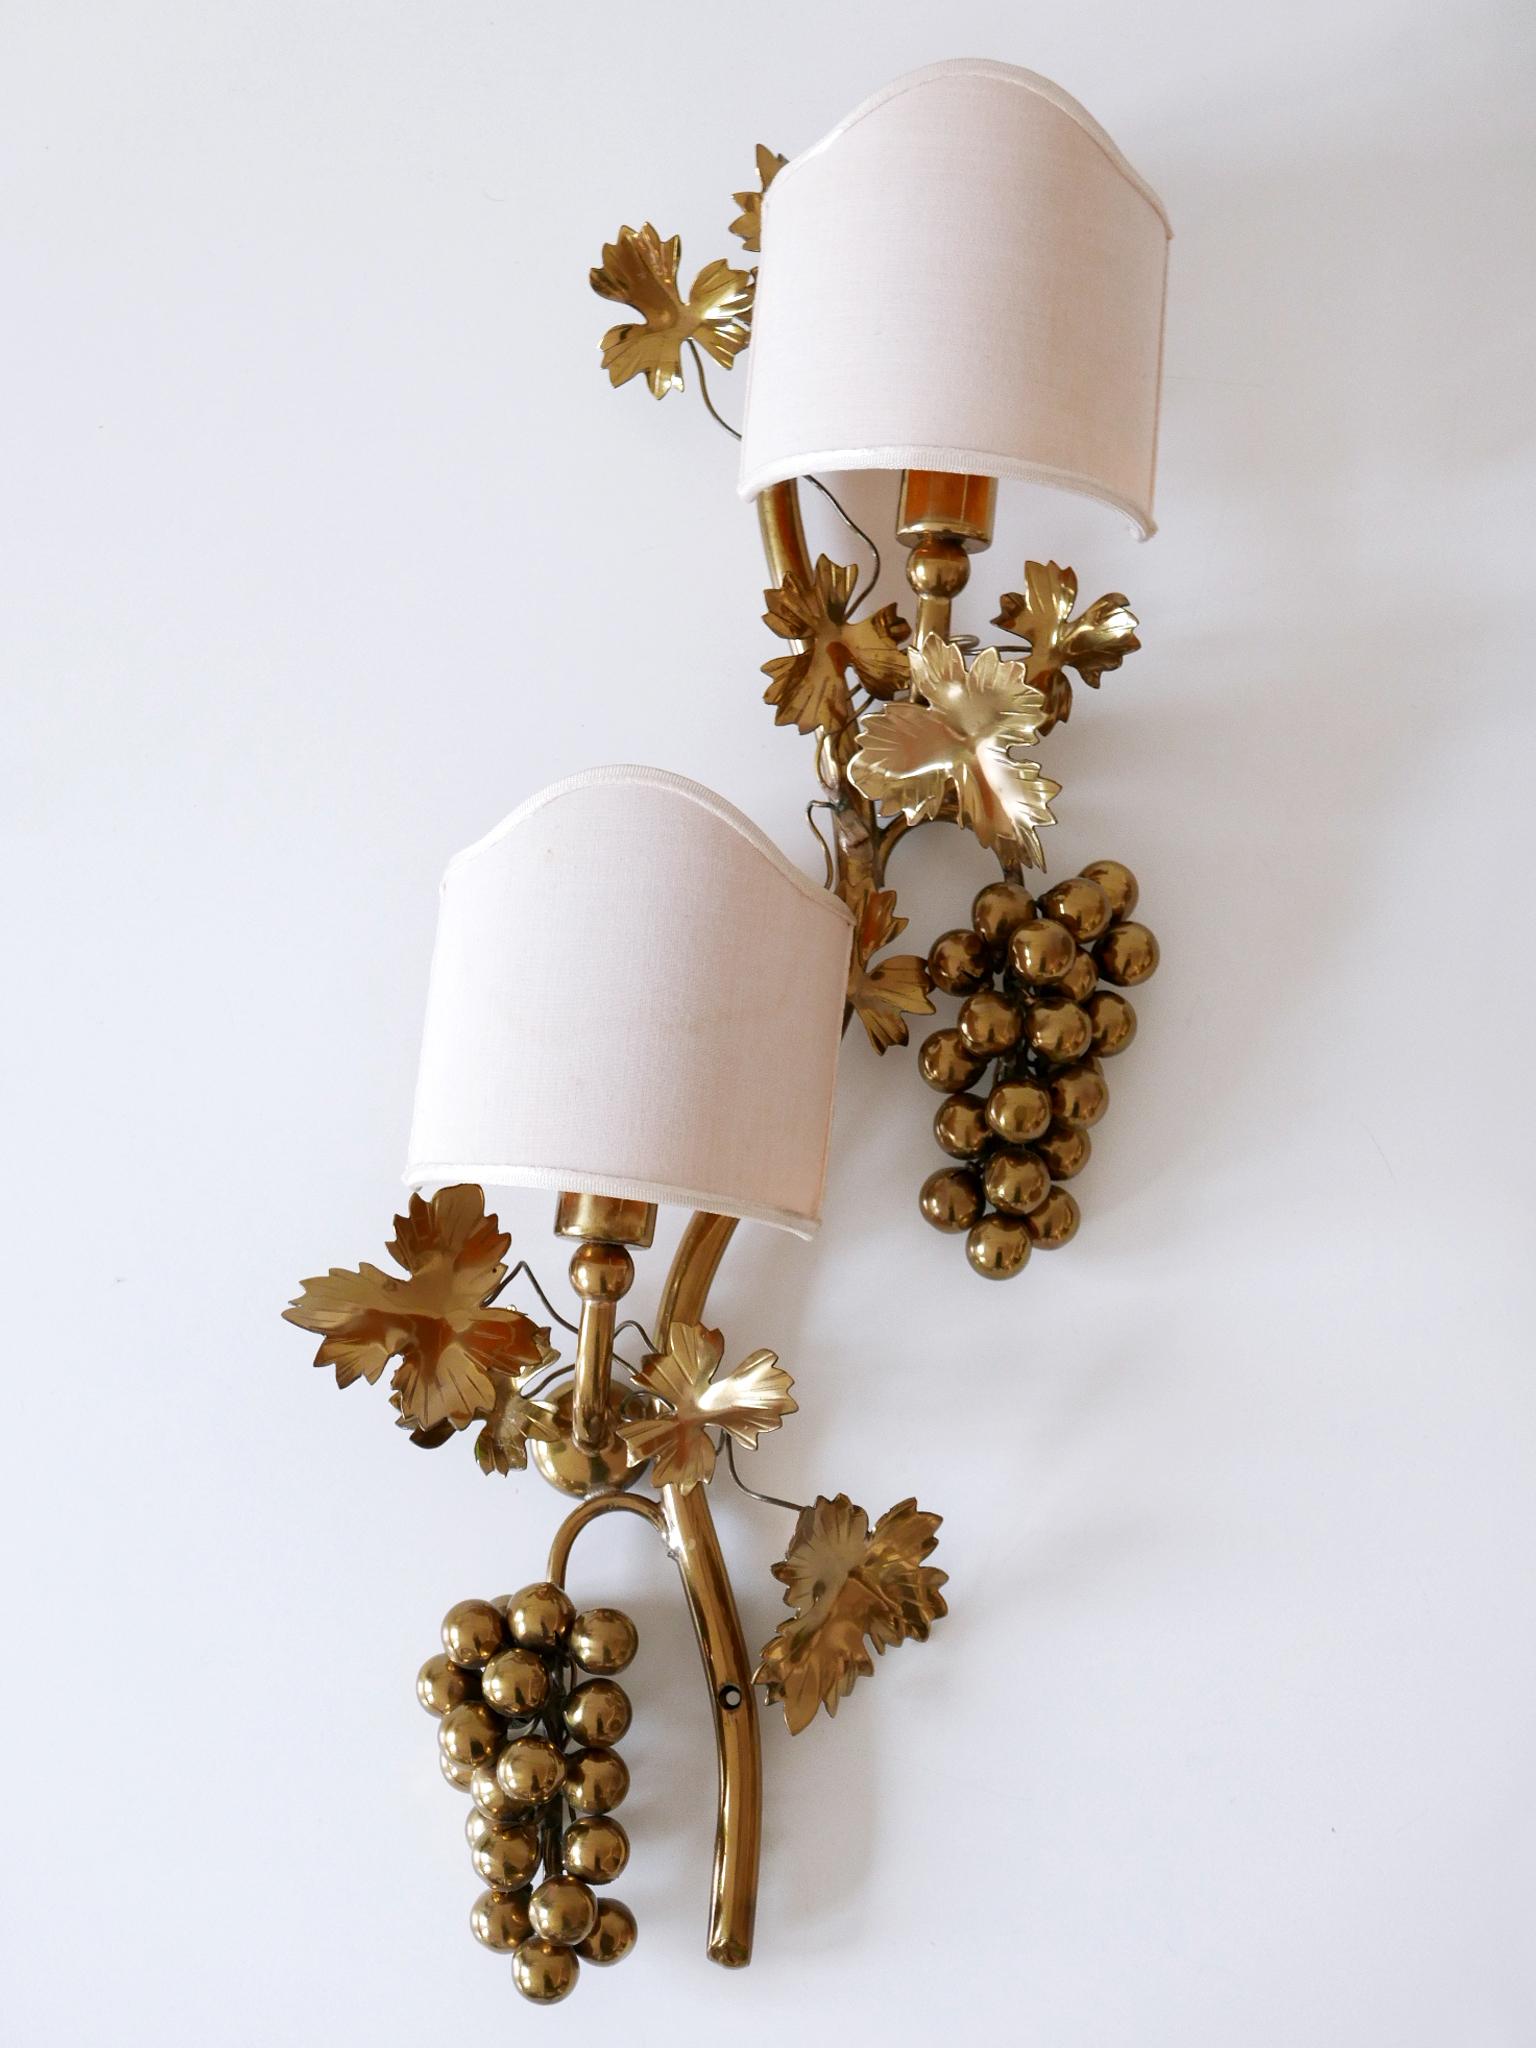 Set of Two Mid-Century Brass Grape Vine Leaves Sconces or Wall Lamps 1970s For Sale 7